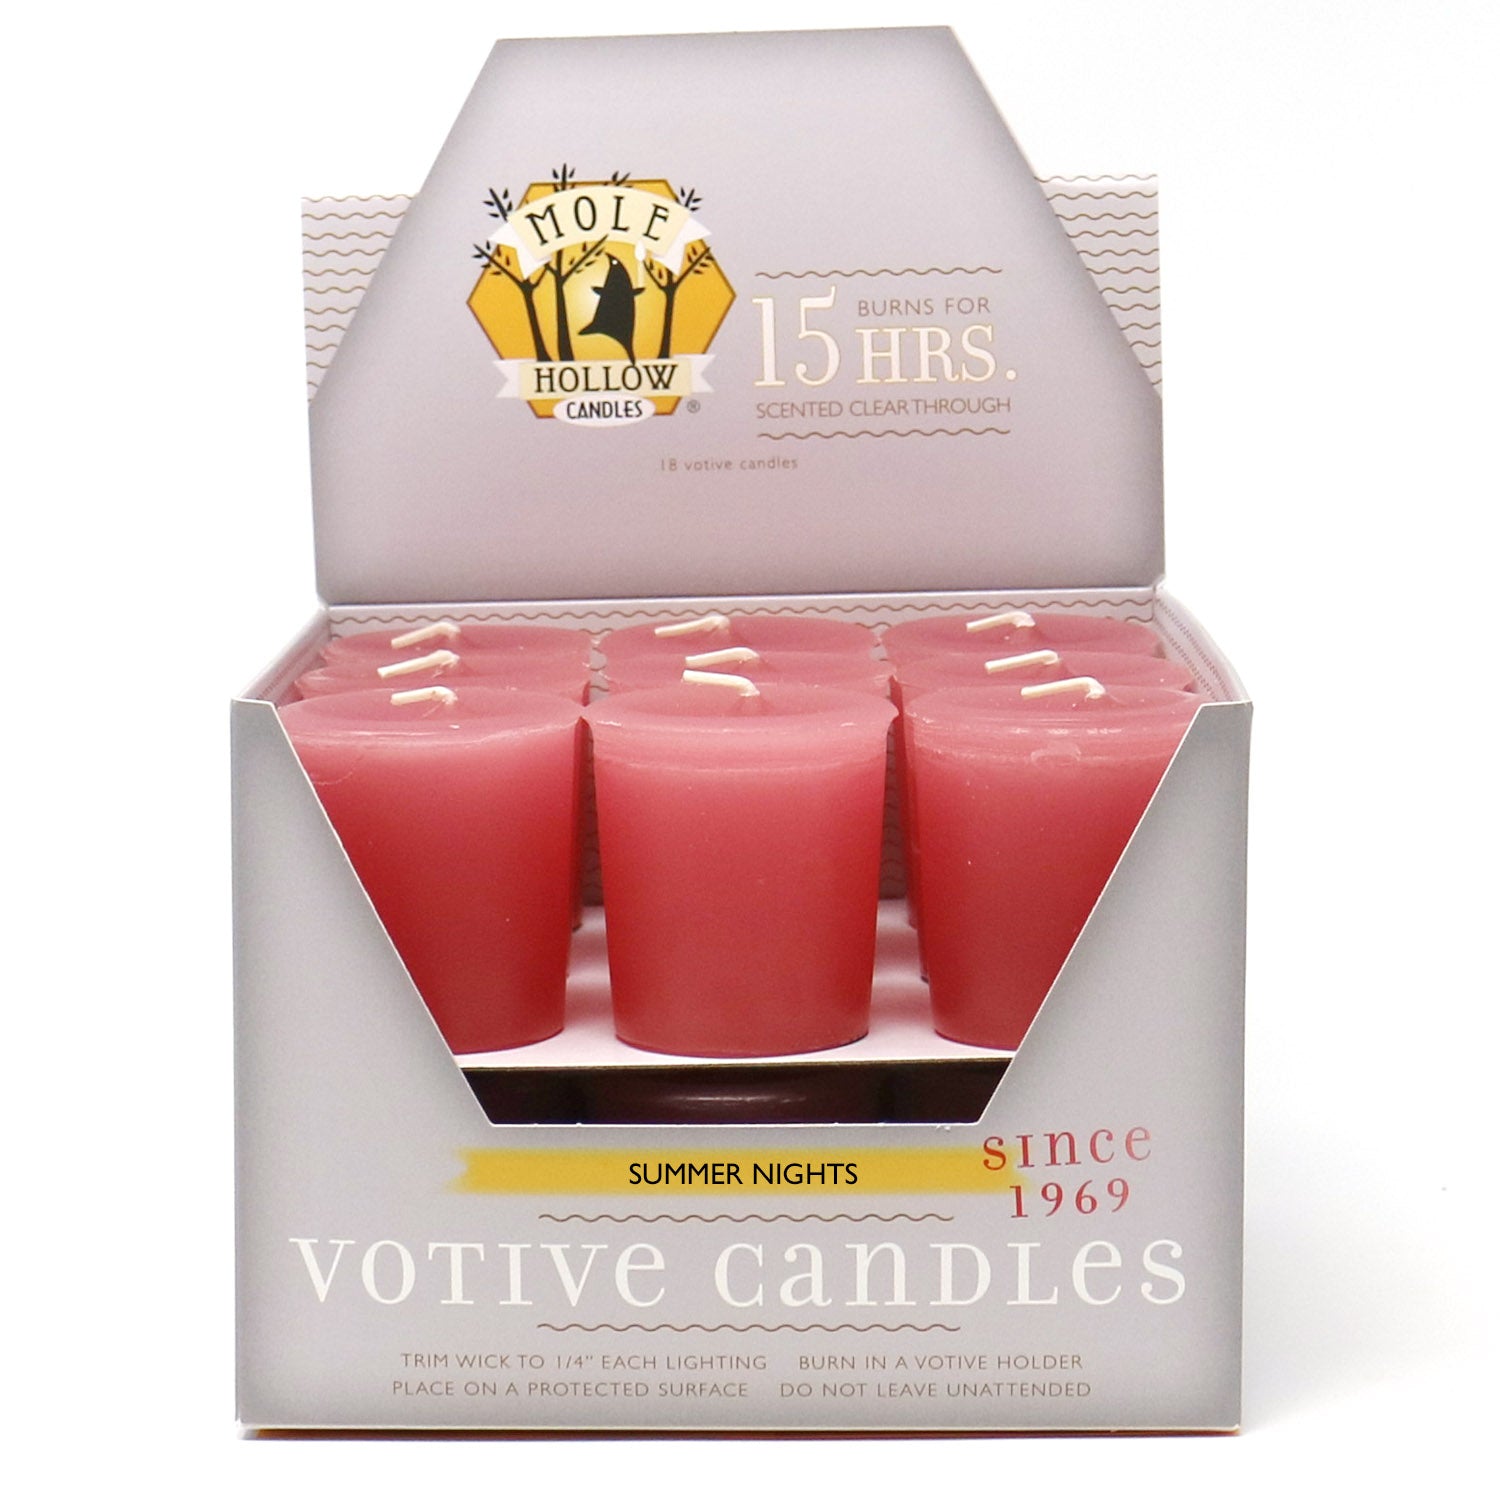 Summer Nights scented votive candles box of 18